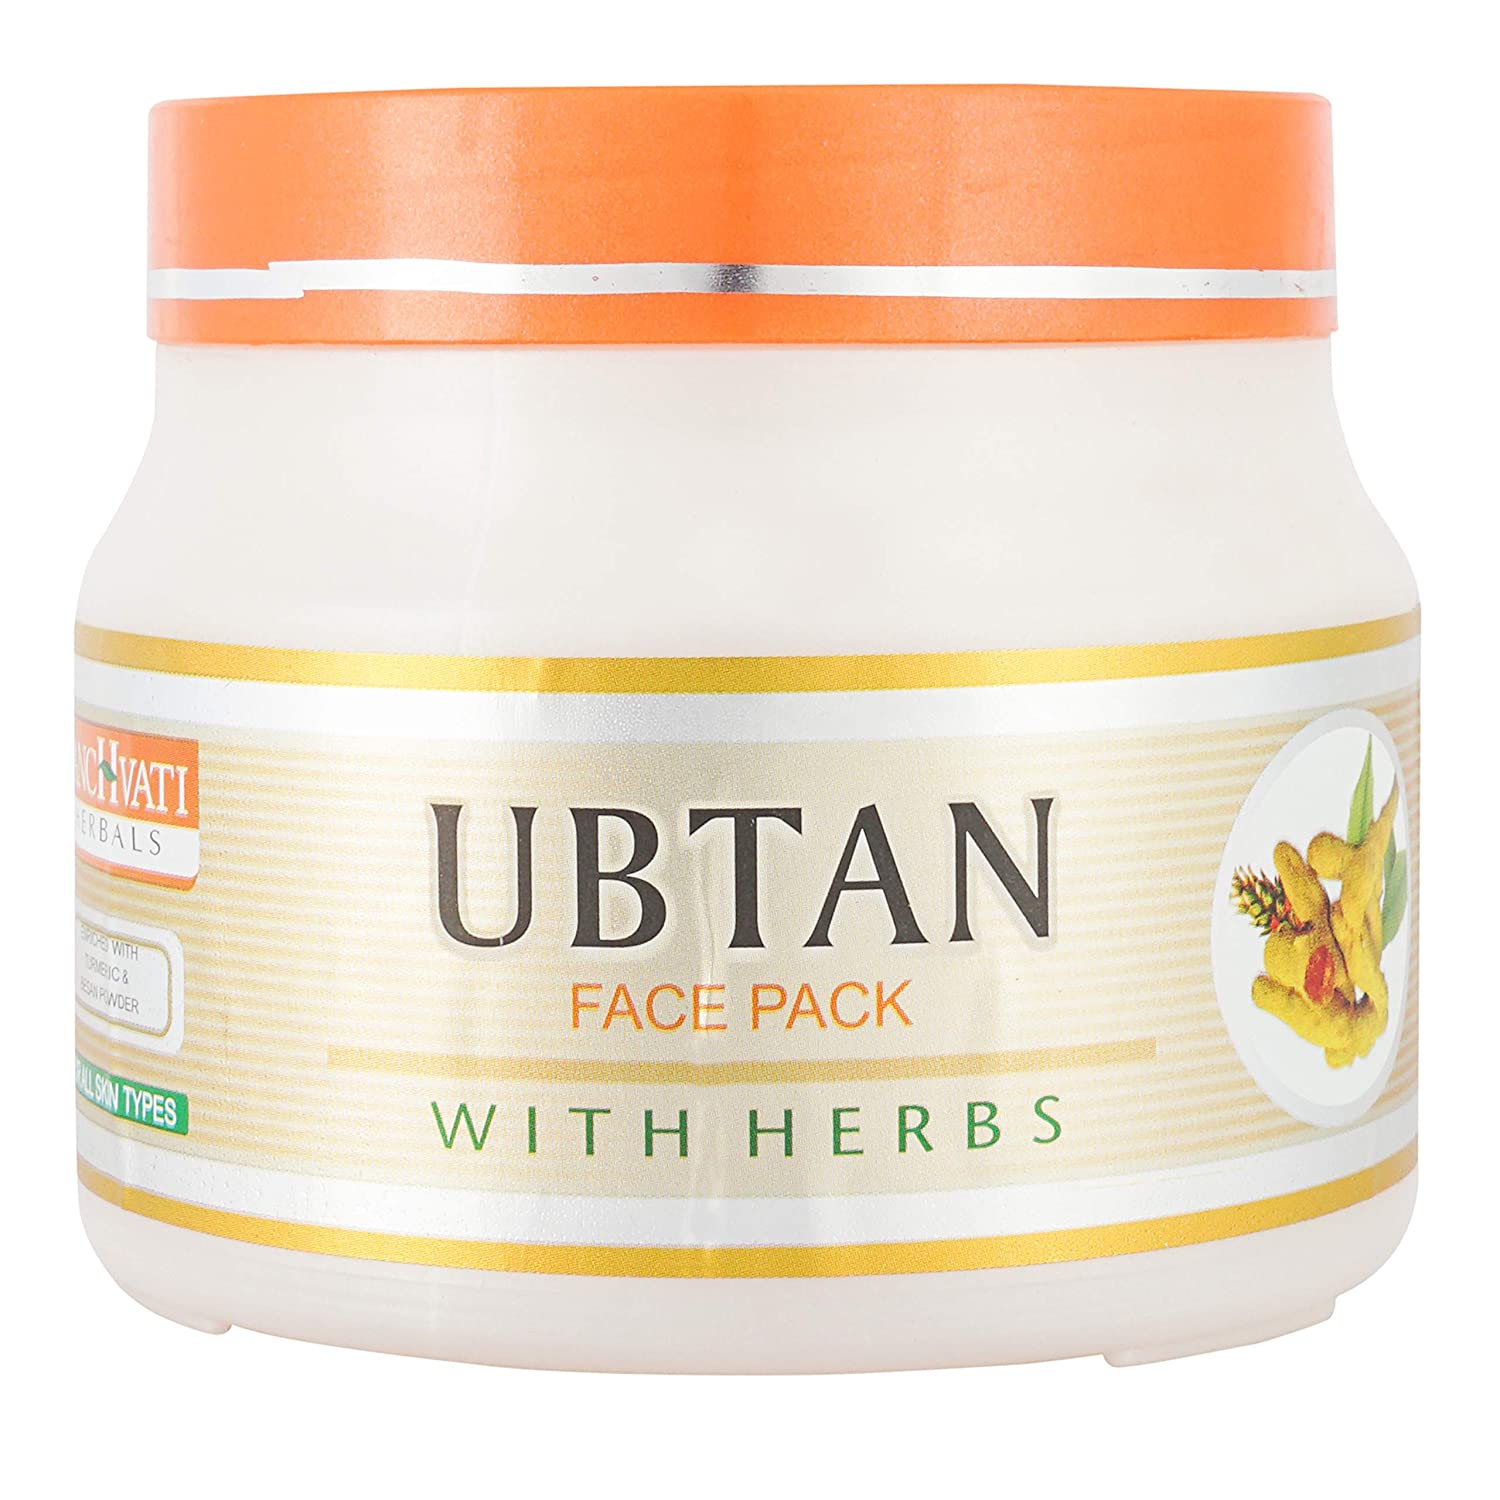 Panchvati Herbals Ubtan Face Pack With Herbs 500 gm, For Deeply cleanses skin cells & Removes Sun Tan